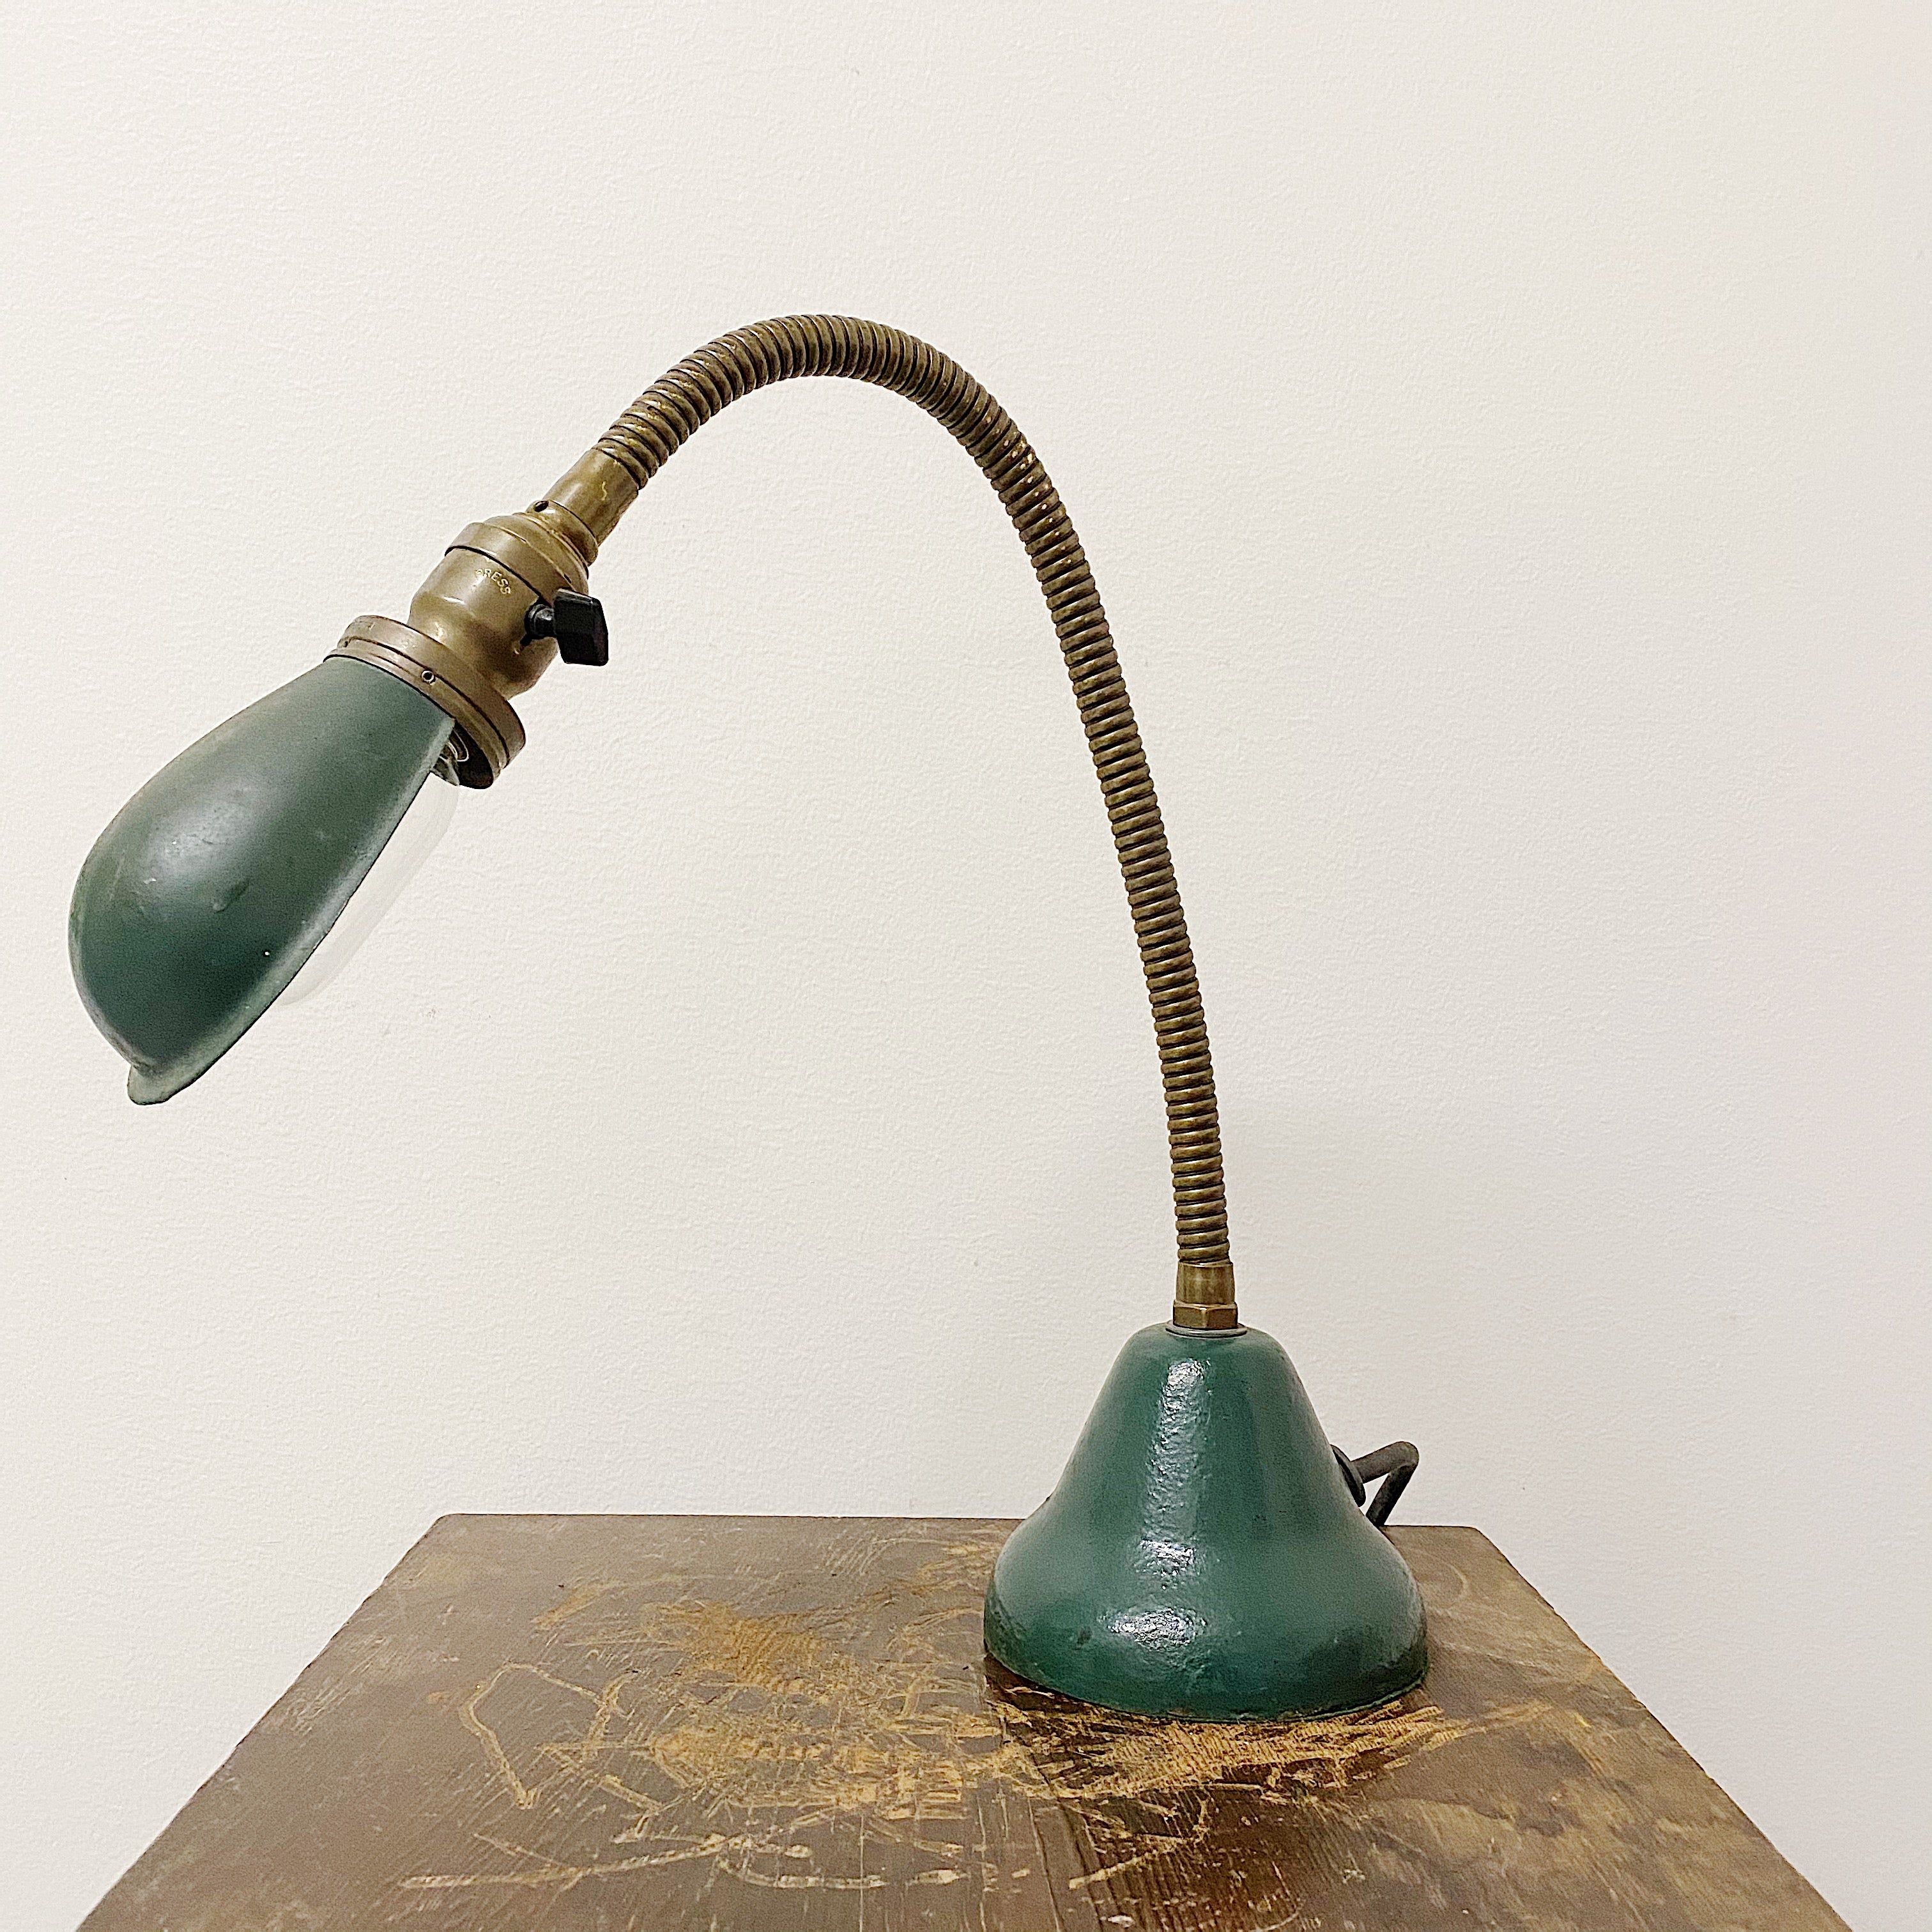 Antique Hubbell Gooseneck Lamp with Rare Metal Base - 1920s Industrial Brass Task Light - Green Machinist Lamps - Large Unusual Table Lights Green